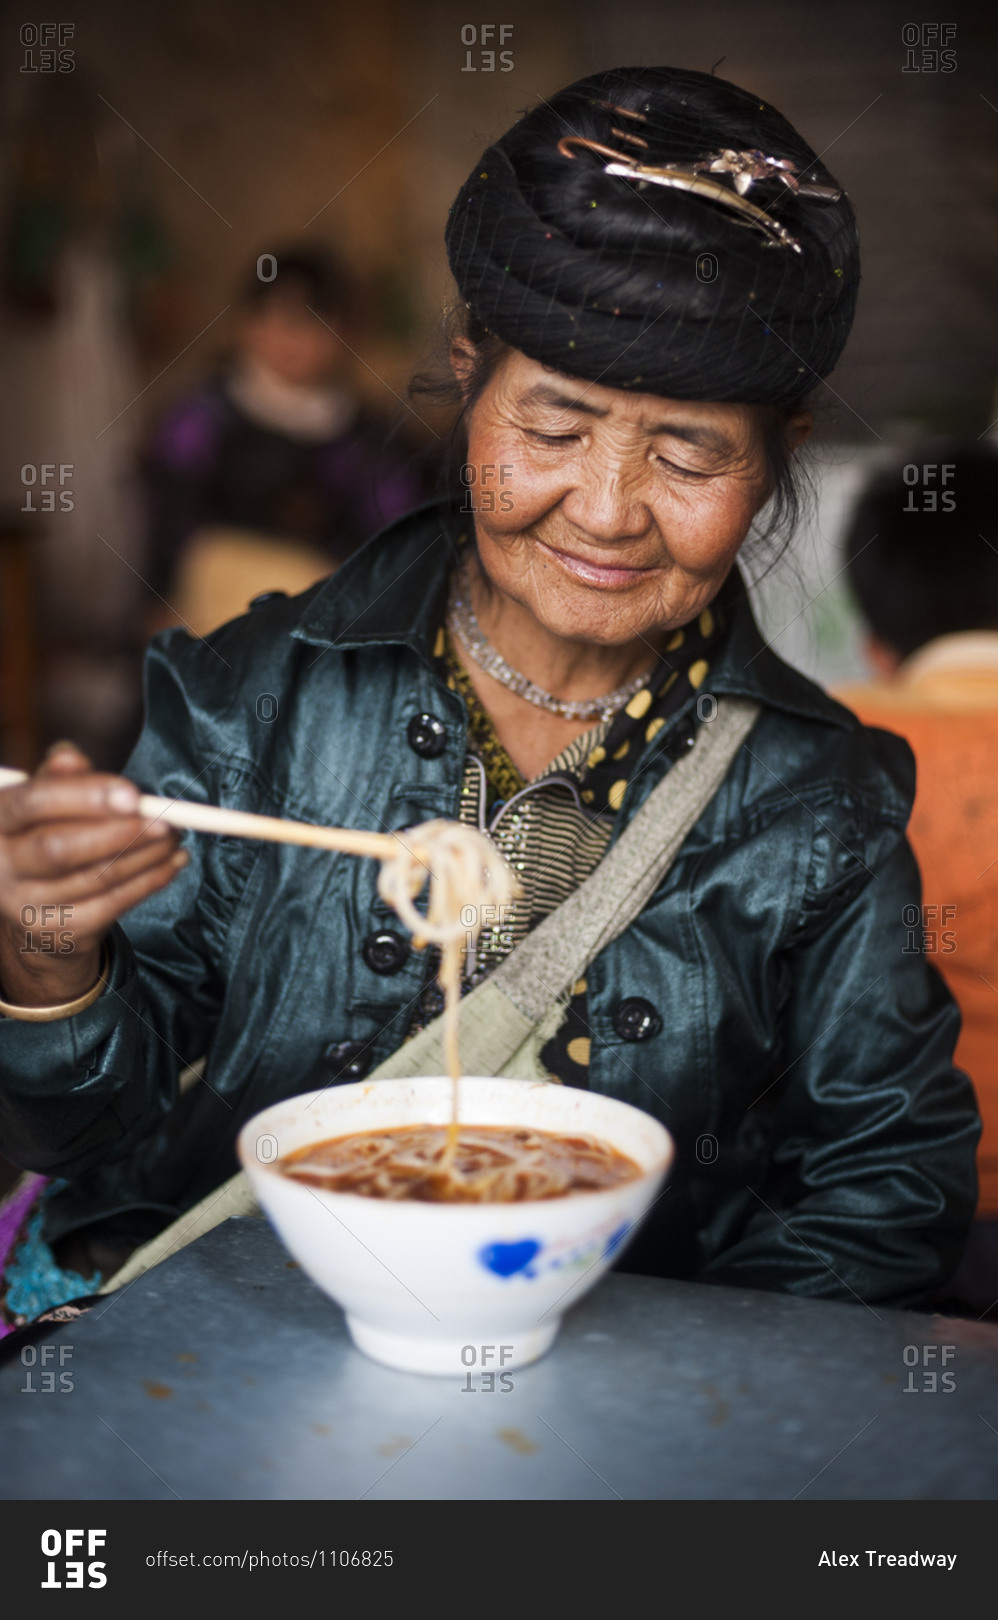 A Miao woman eats a bowl of noodles in the Yunnan province of China